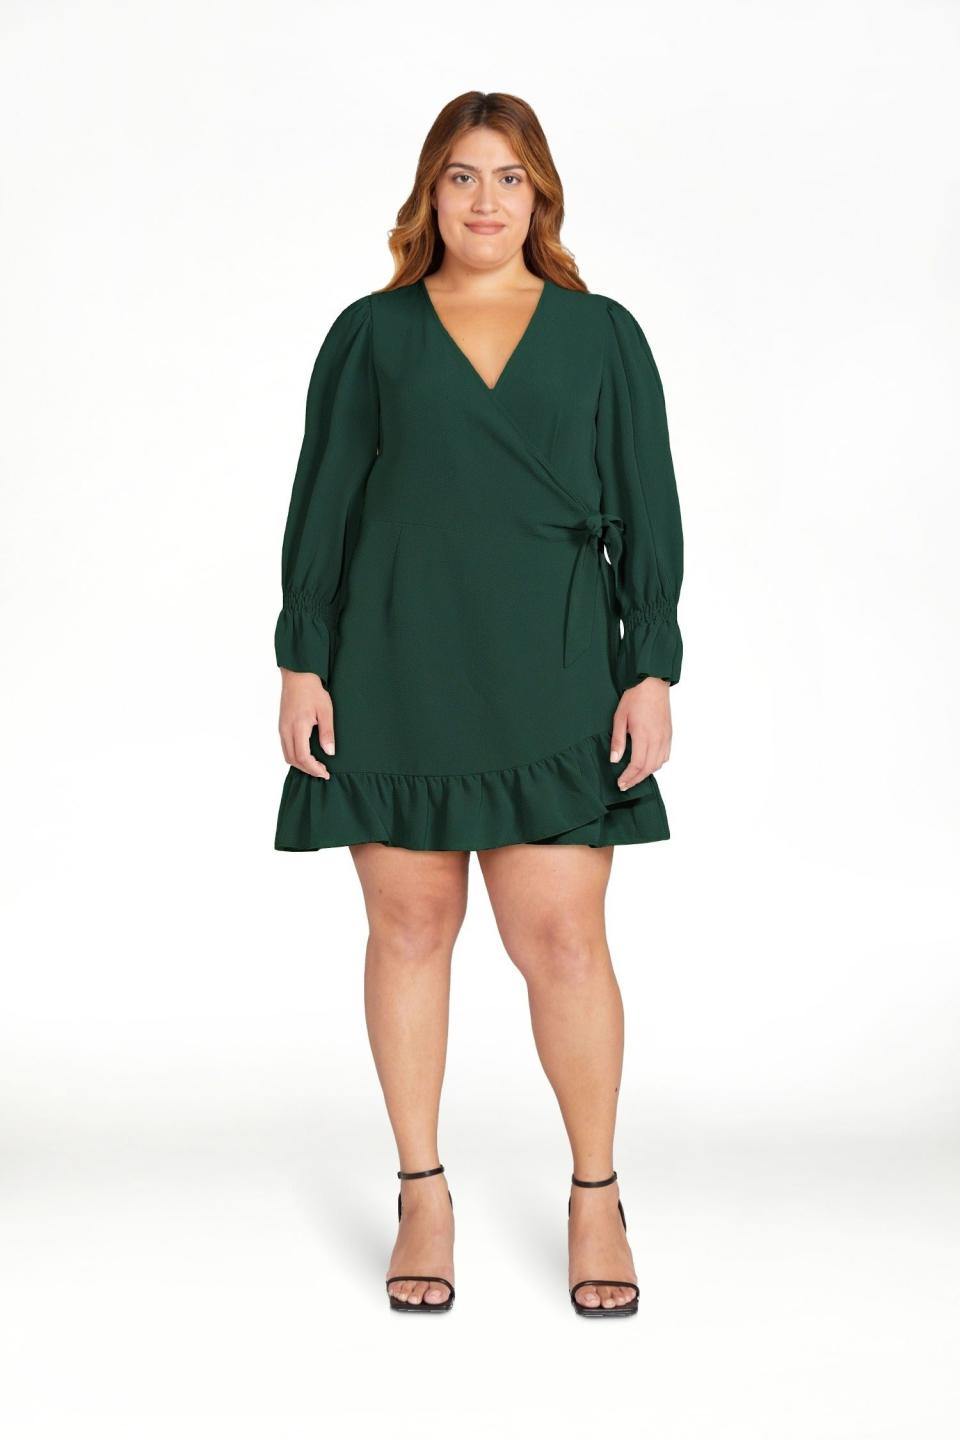 model in a green V-neck dress with a tie waist and ruffled hem, paired with black heels